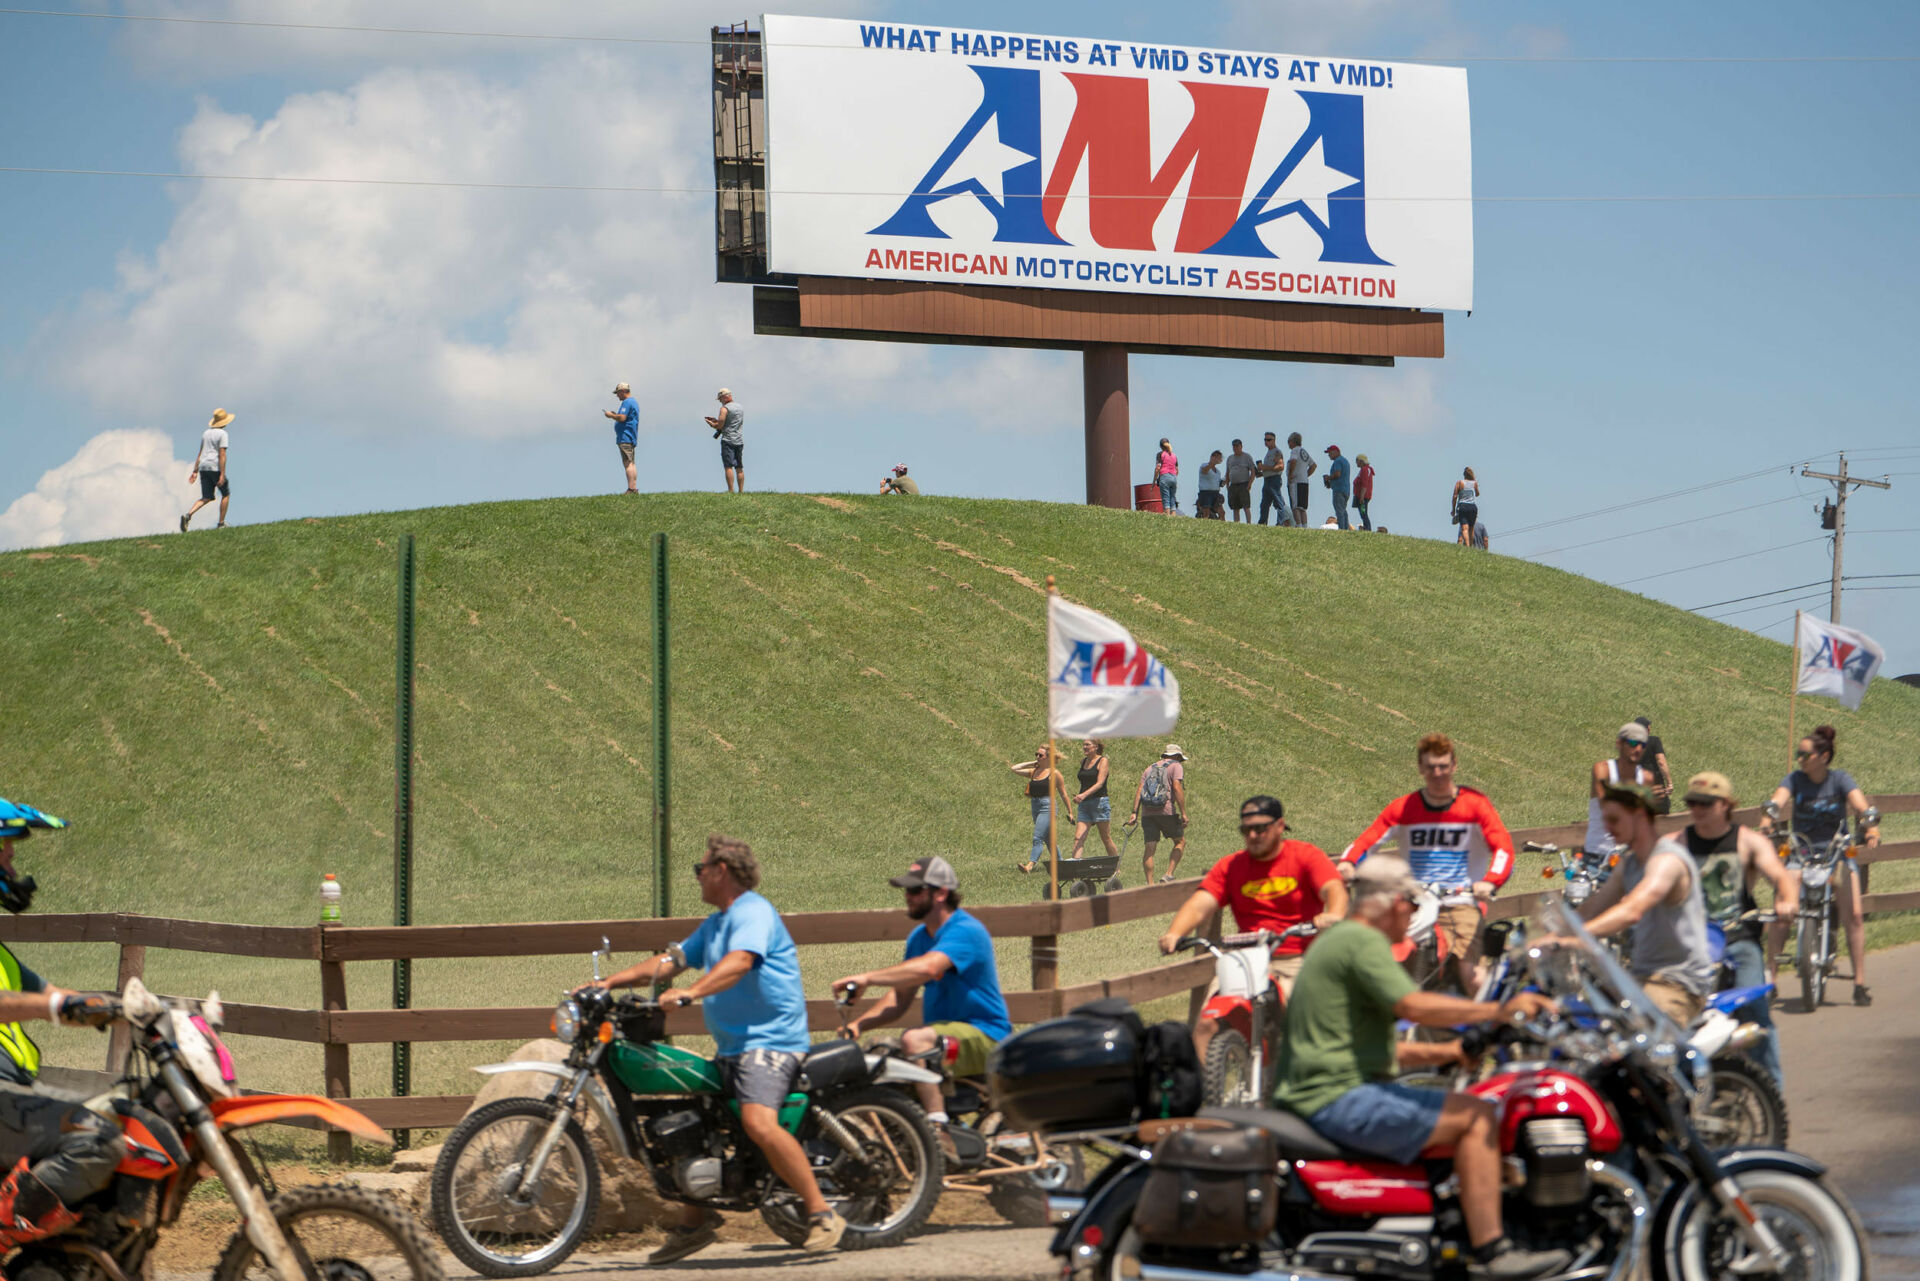 A scene from AMA Vintage Motorcycle Days 2022 at Mid-Ohio Sports Car Course. Photo by Gary Yasaki, courtesy AMA.